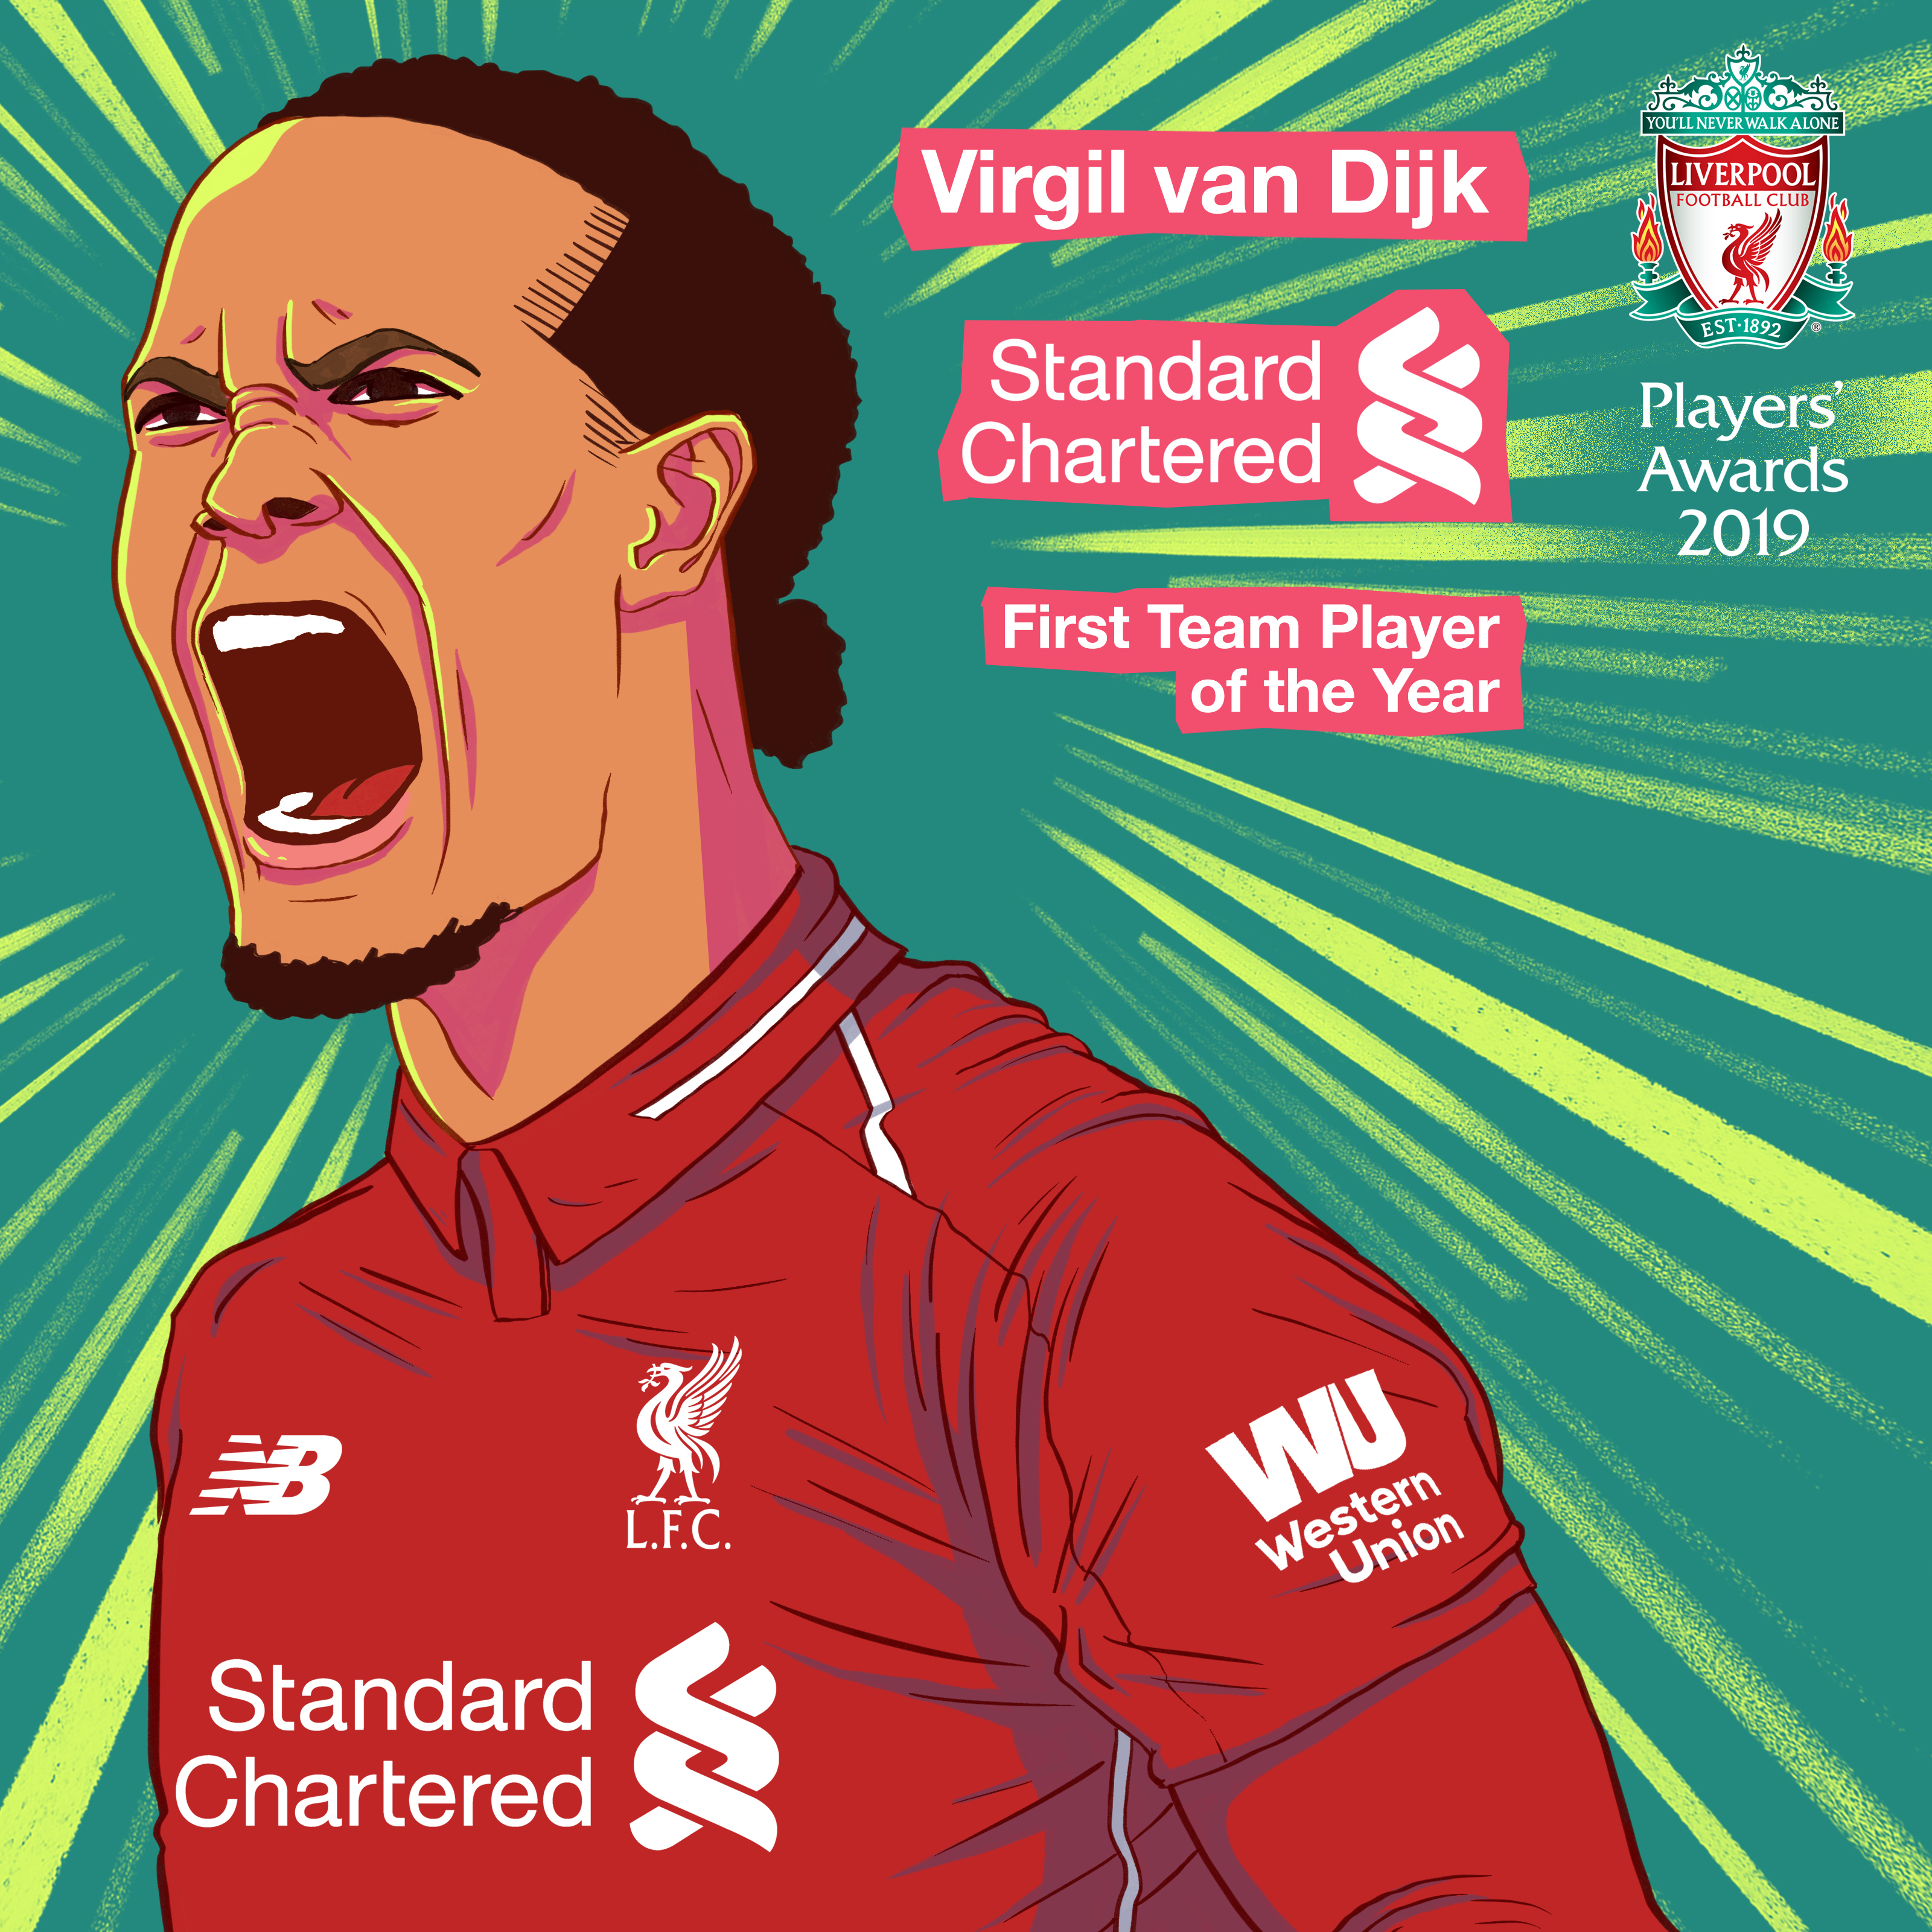 Revealed: The LFC Players' Awards 2019 winners - Liverpool FC